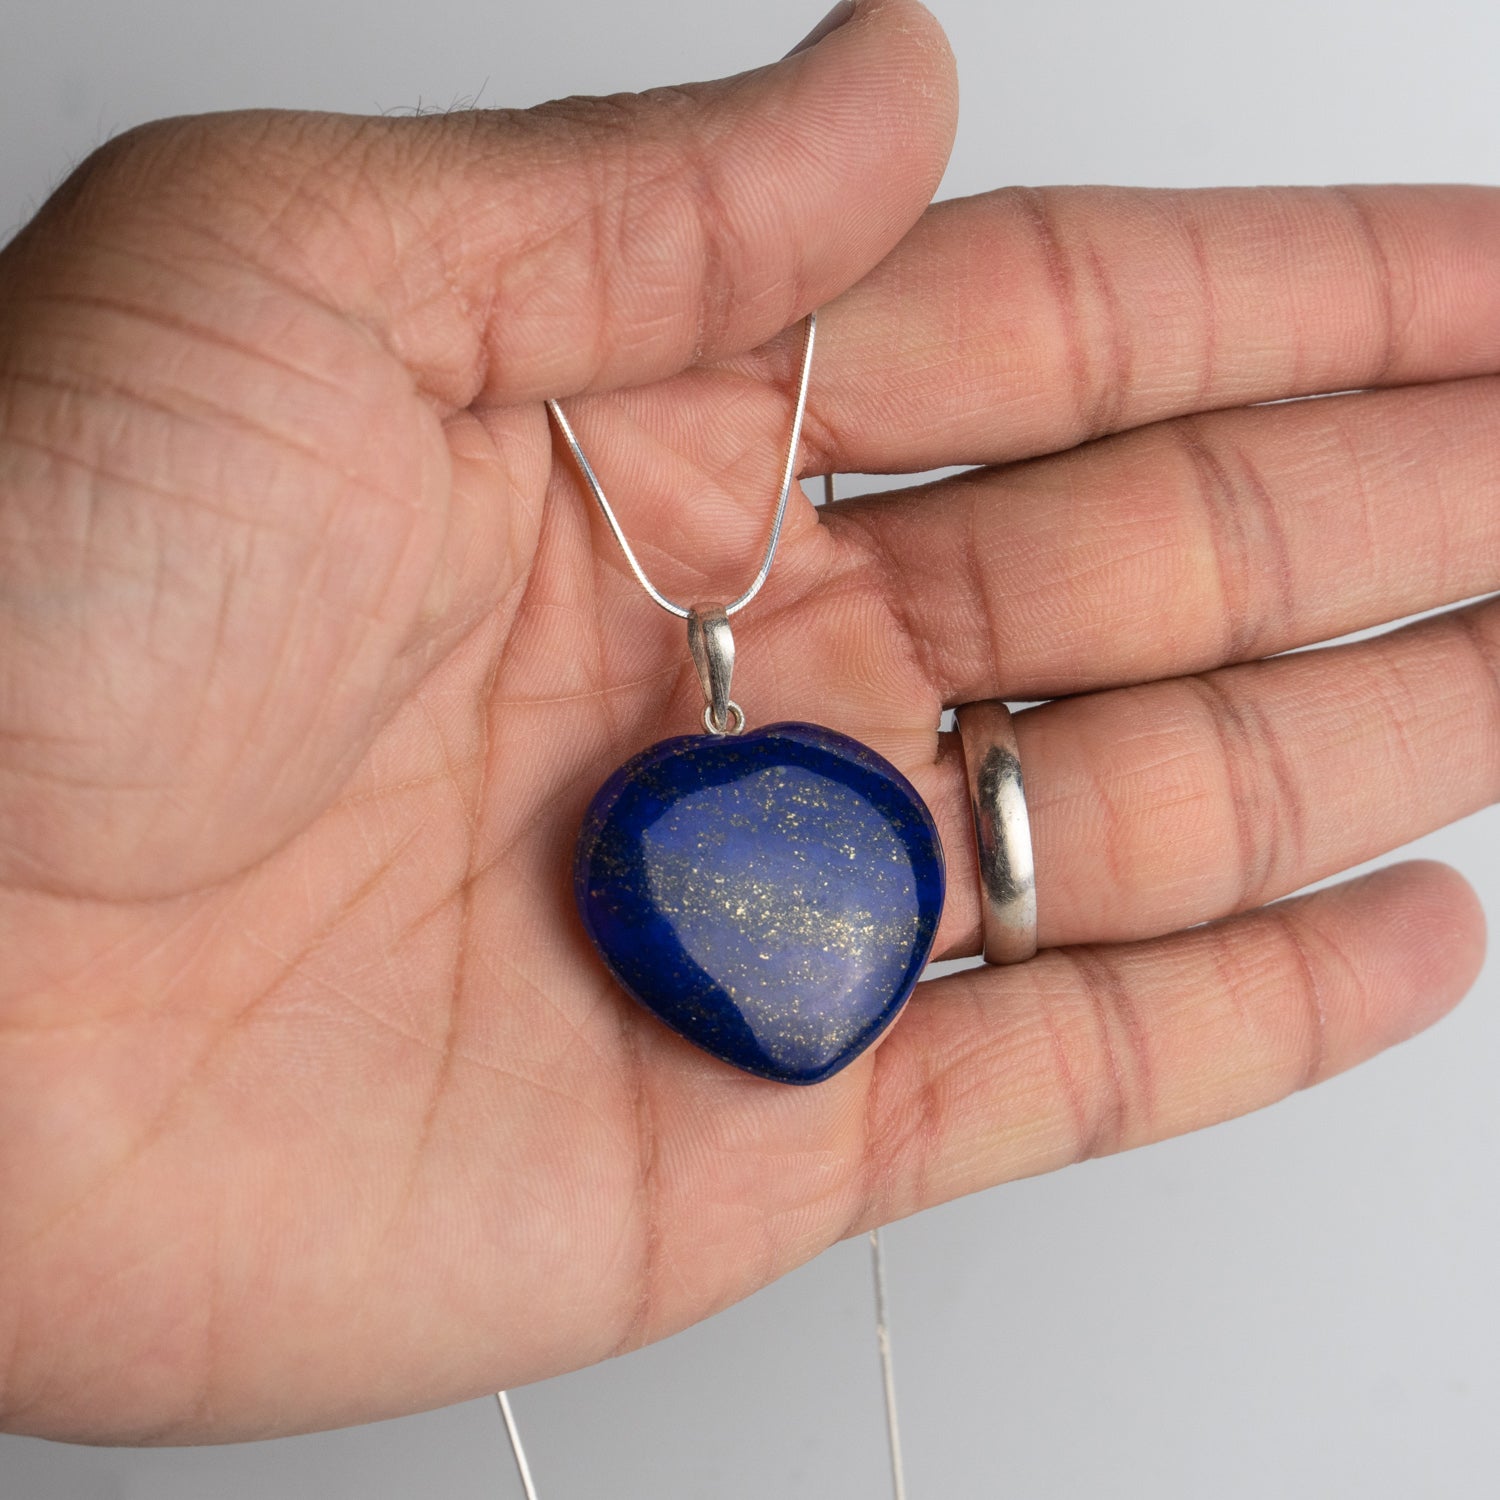 Genuine Lapis Lazuli Heart Pendant (11 grams) with Sterling Silver Chain